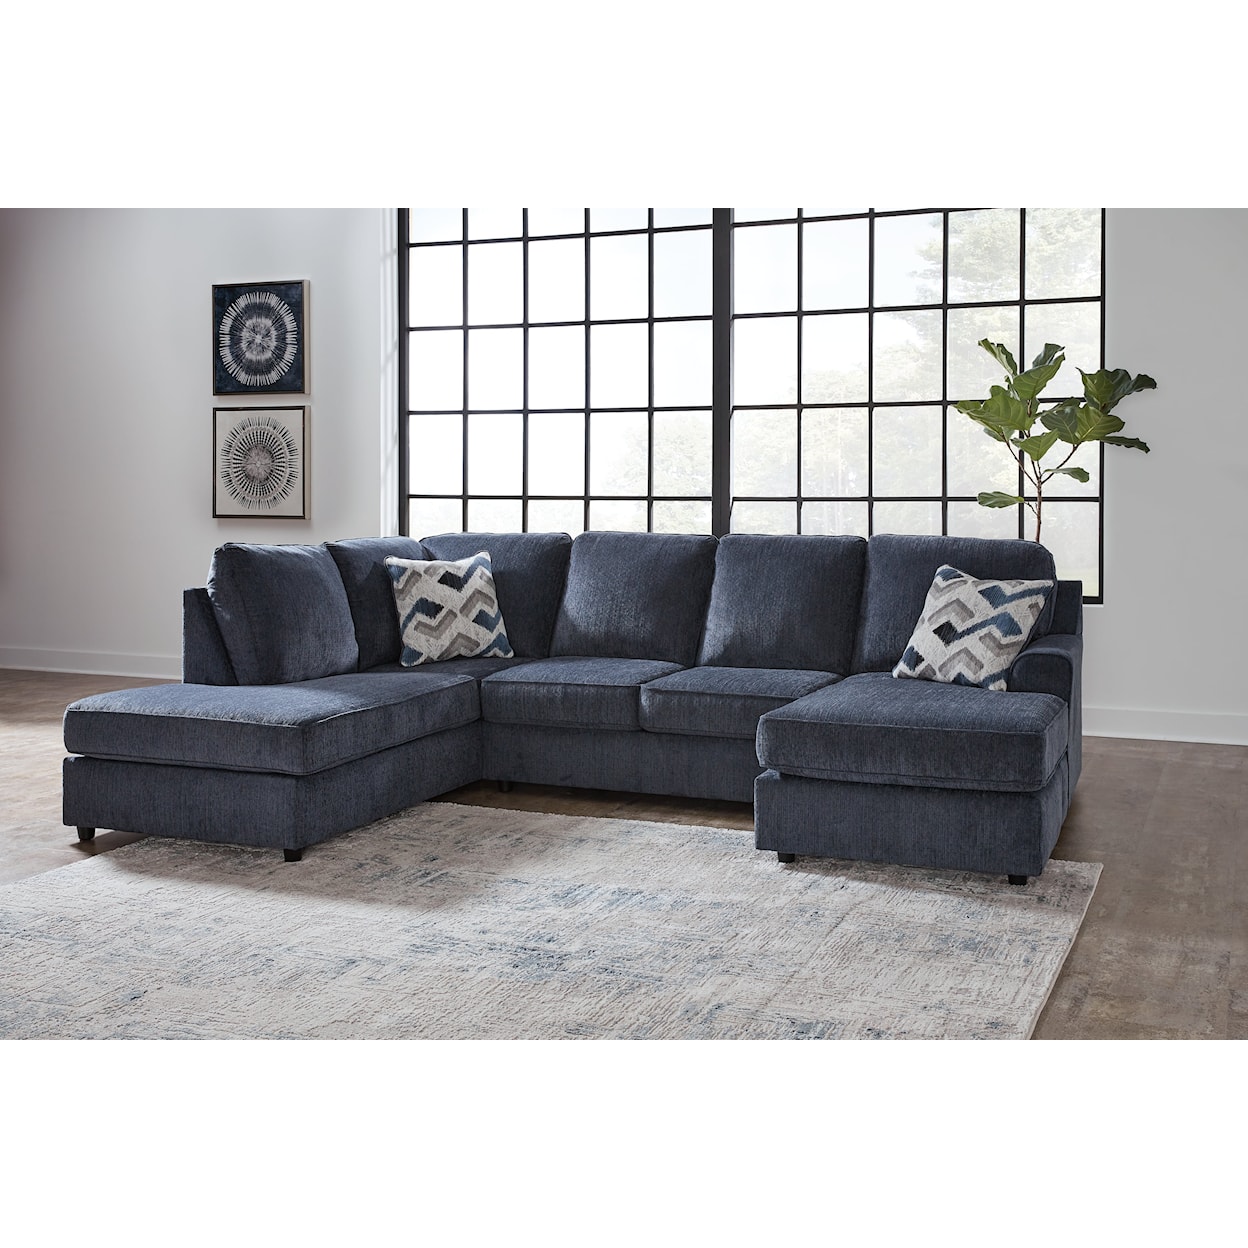 Signature Design by Ashley Albar Place 2-Piece Sectional